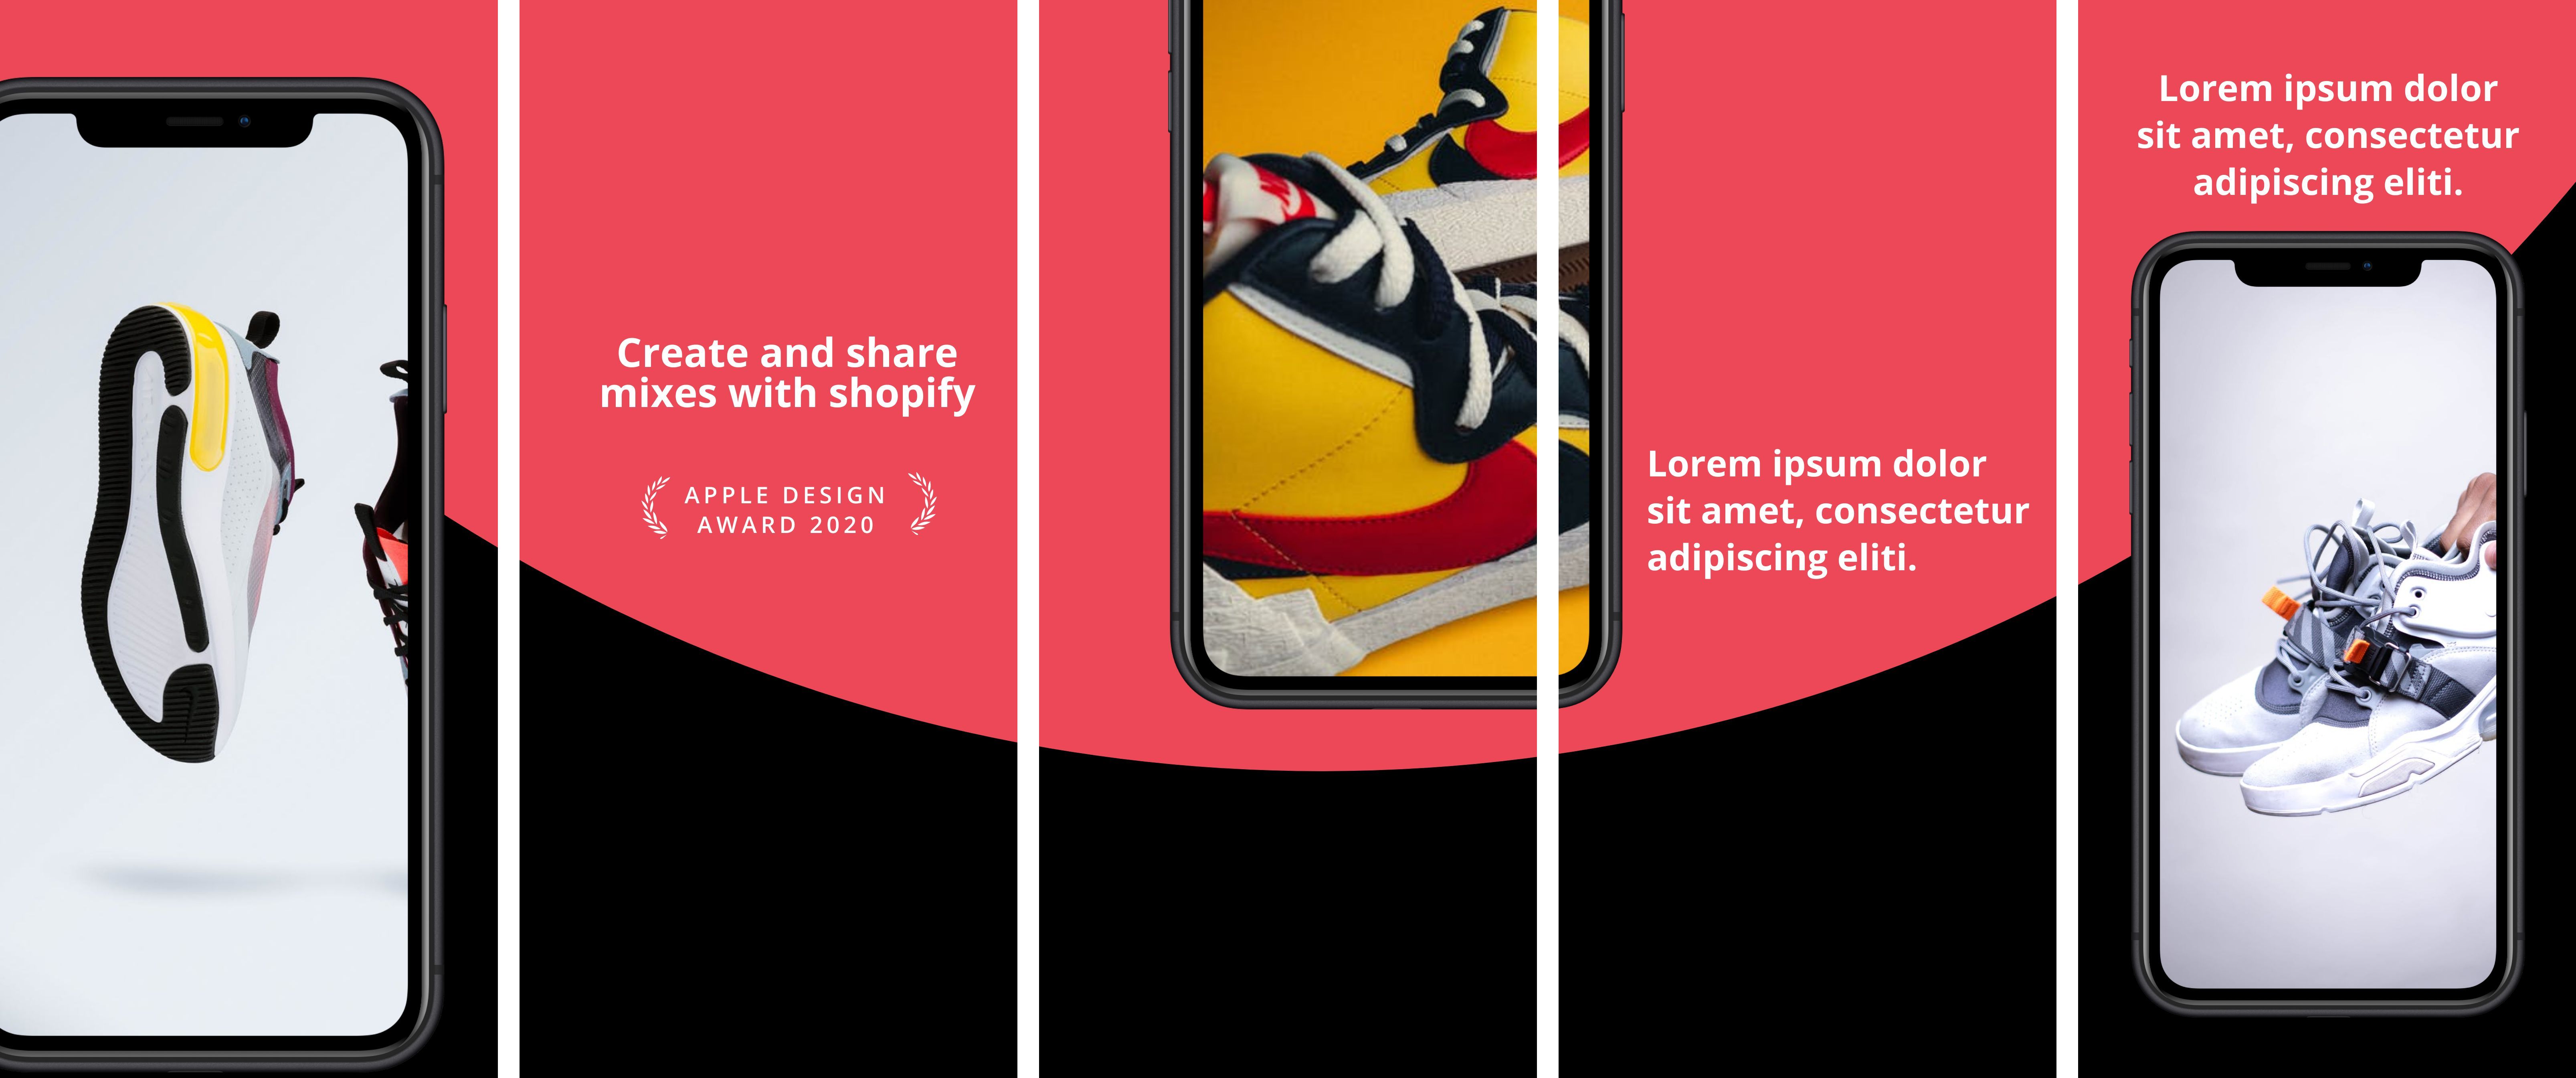 App Store Panorama Screenshot - iPhone XS Max 23 template. Quickly edit fonts, text, colors, and more for free.